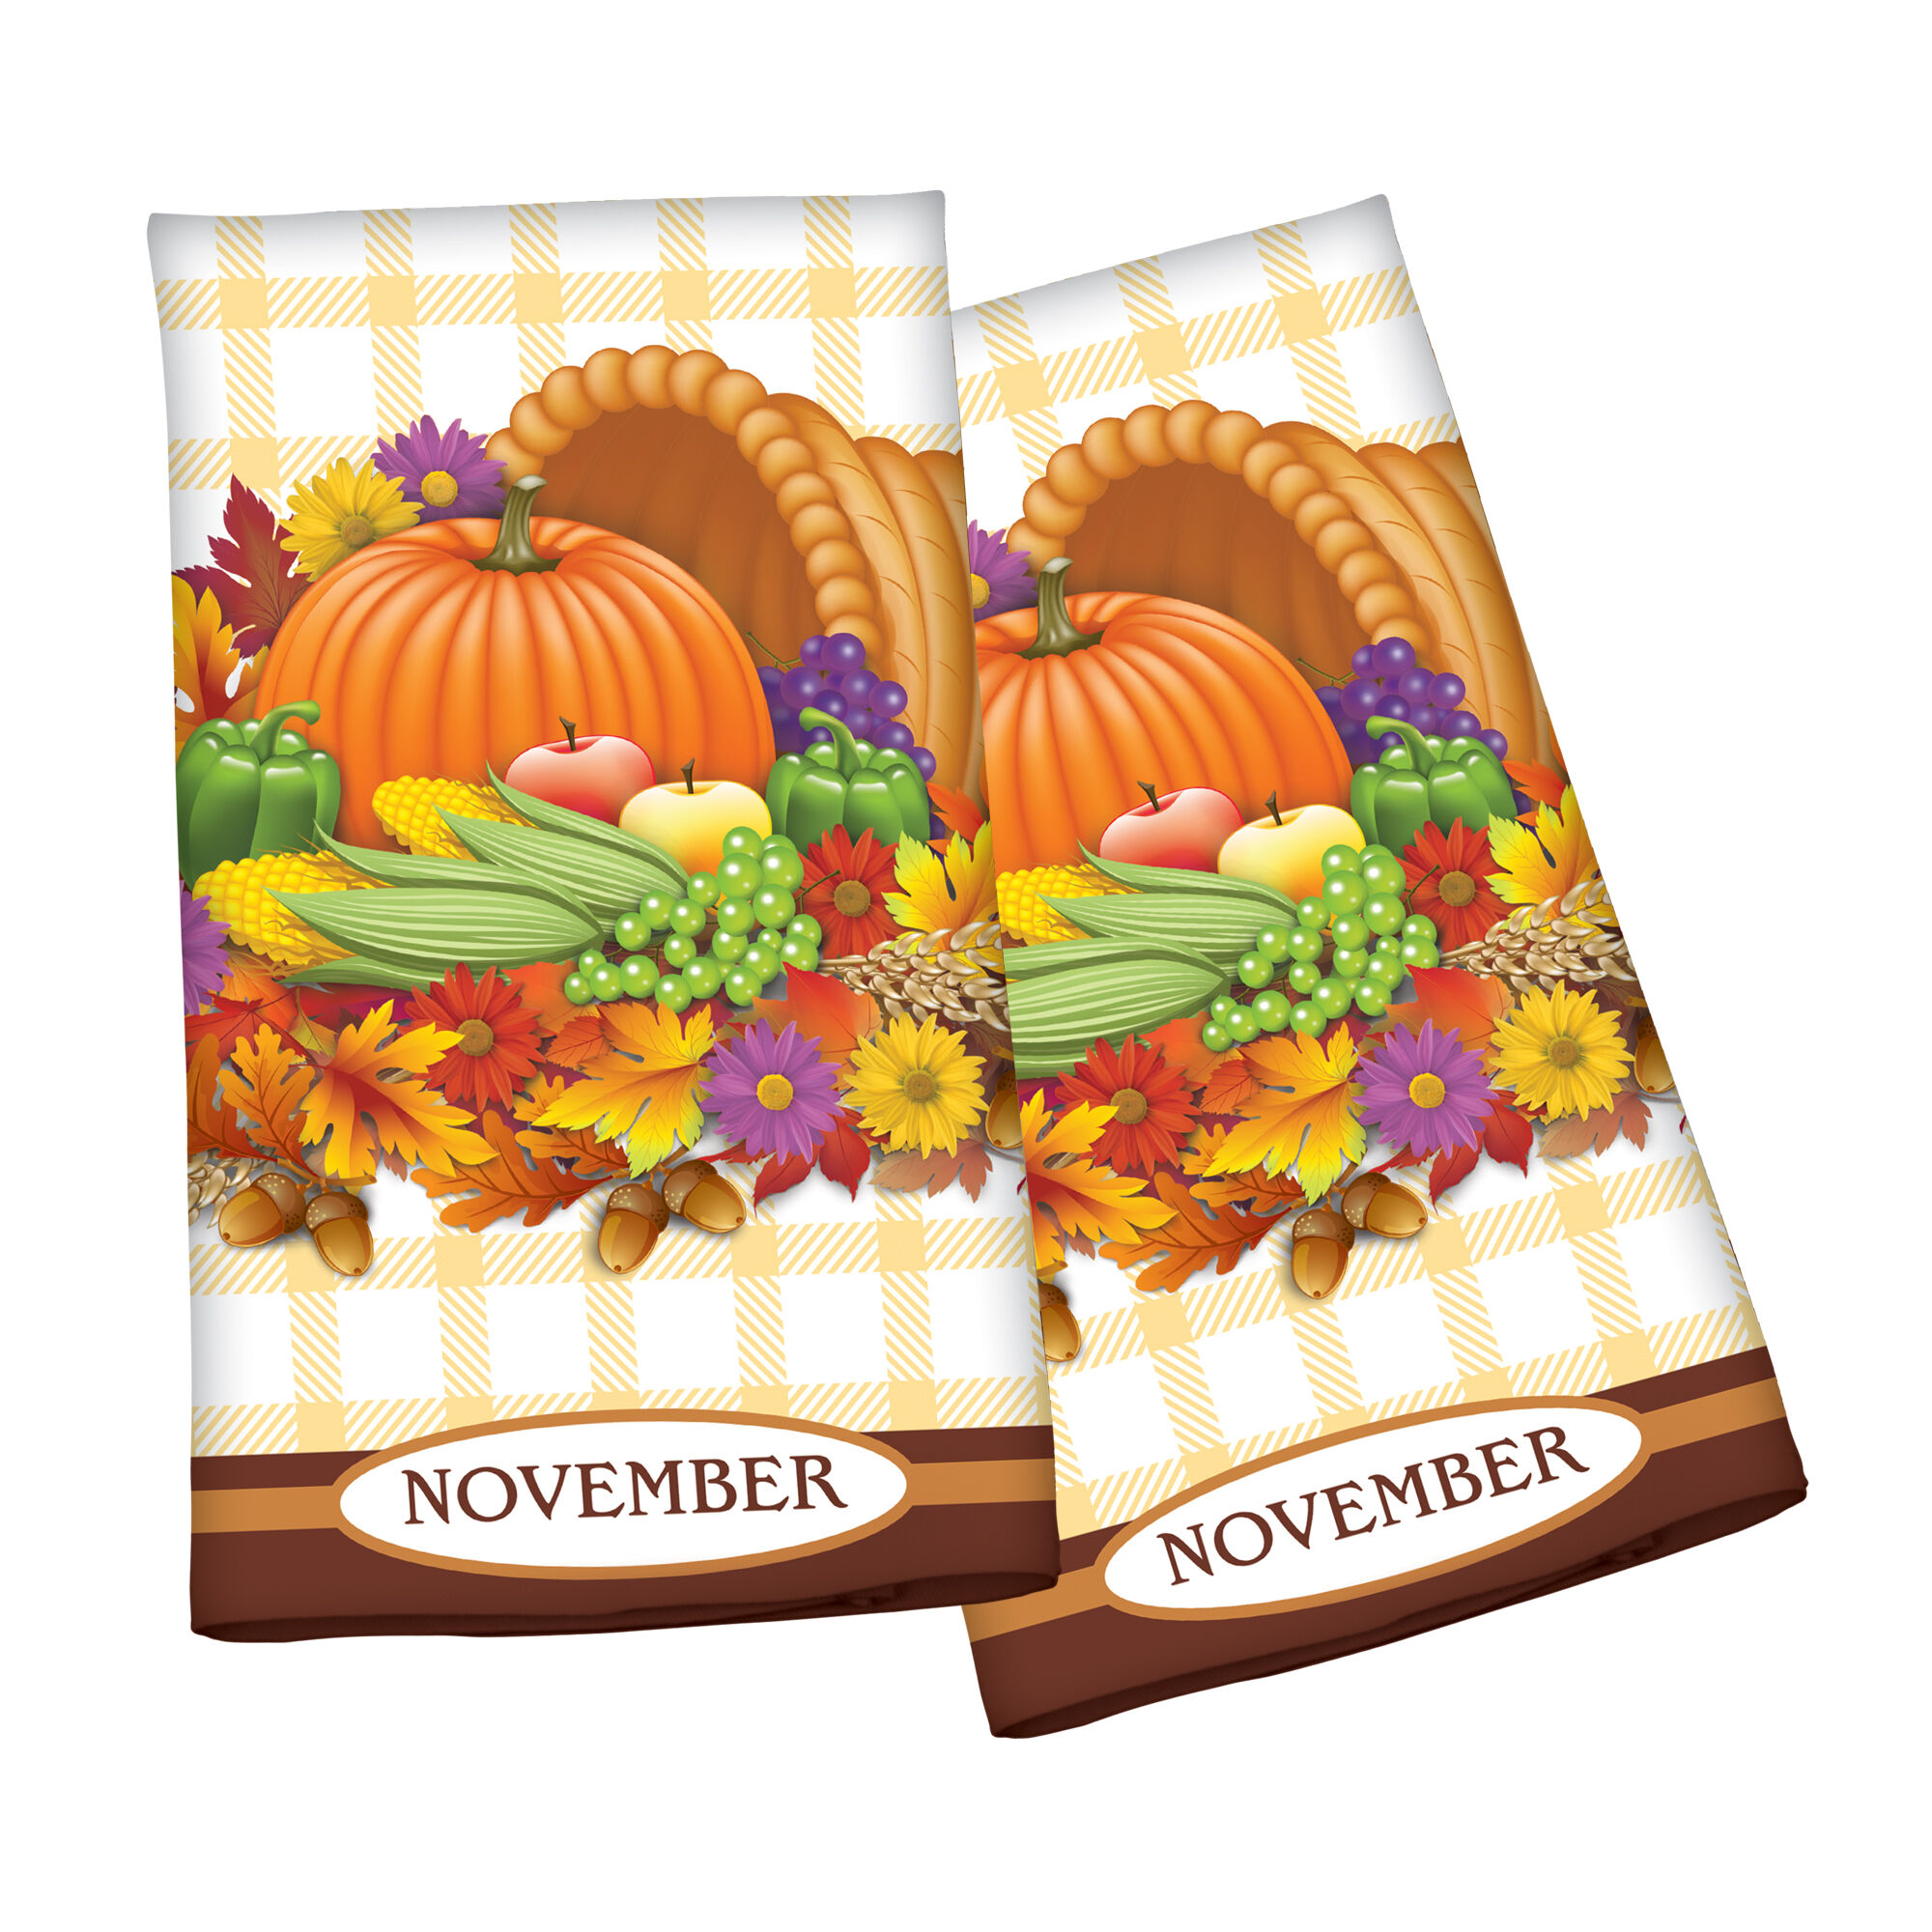 Year of Cheer Kitchen Towel Collection 6844 0015 g november